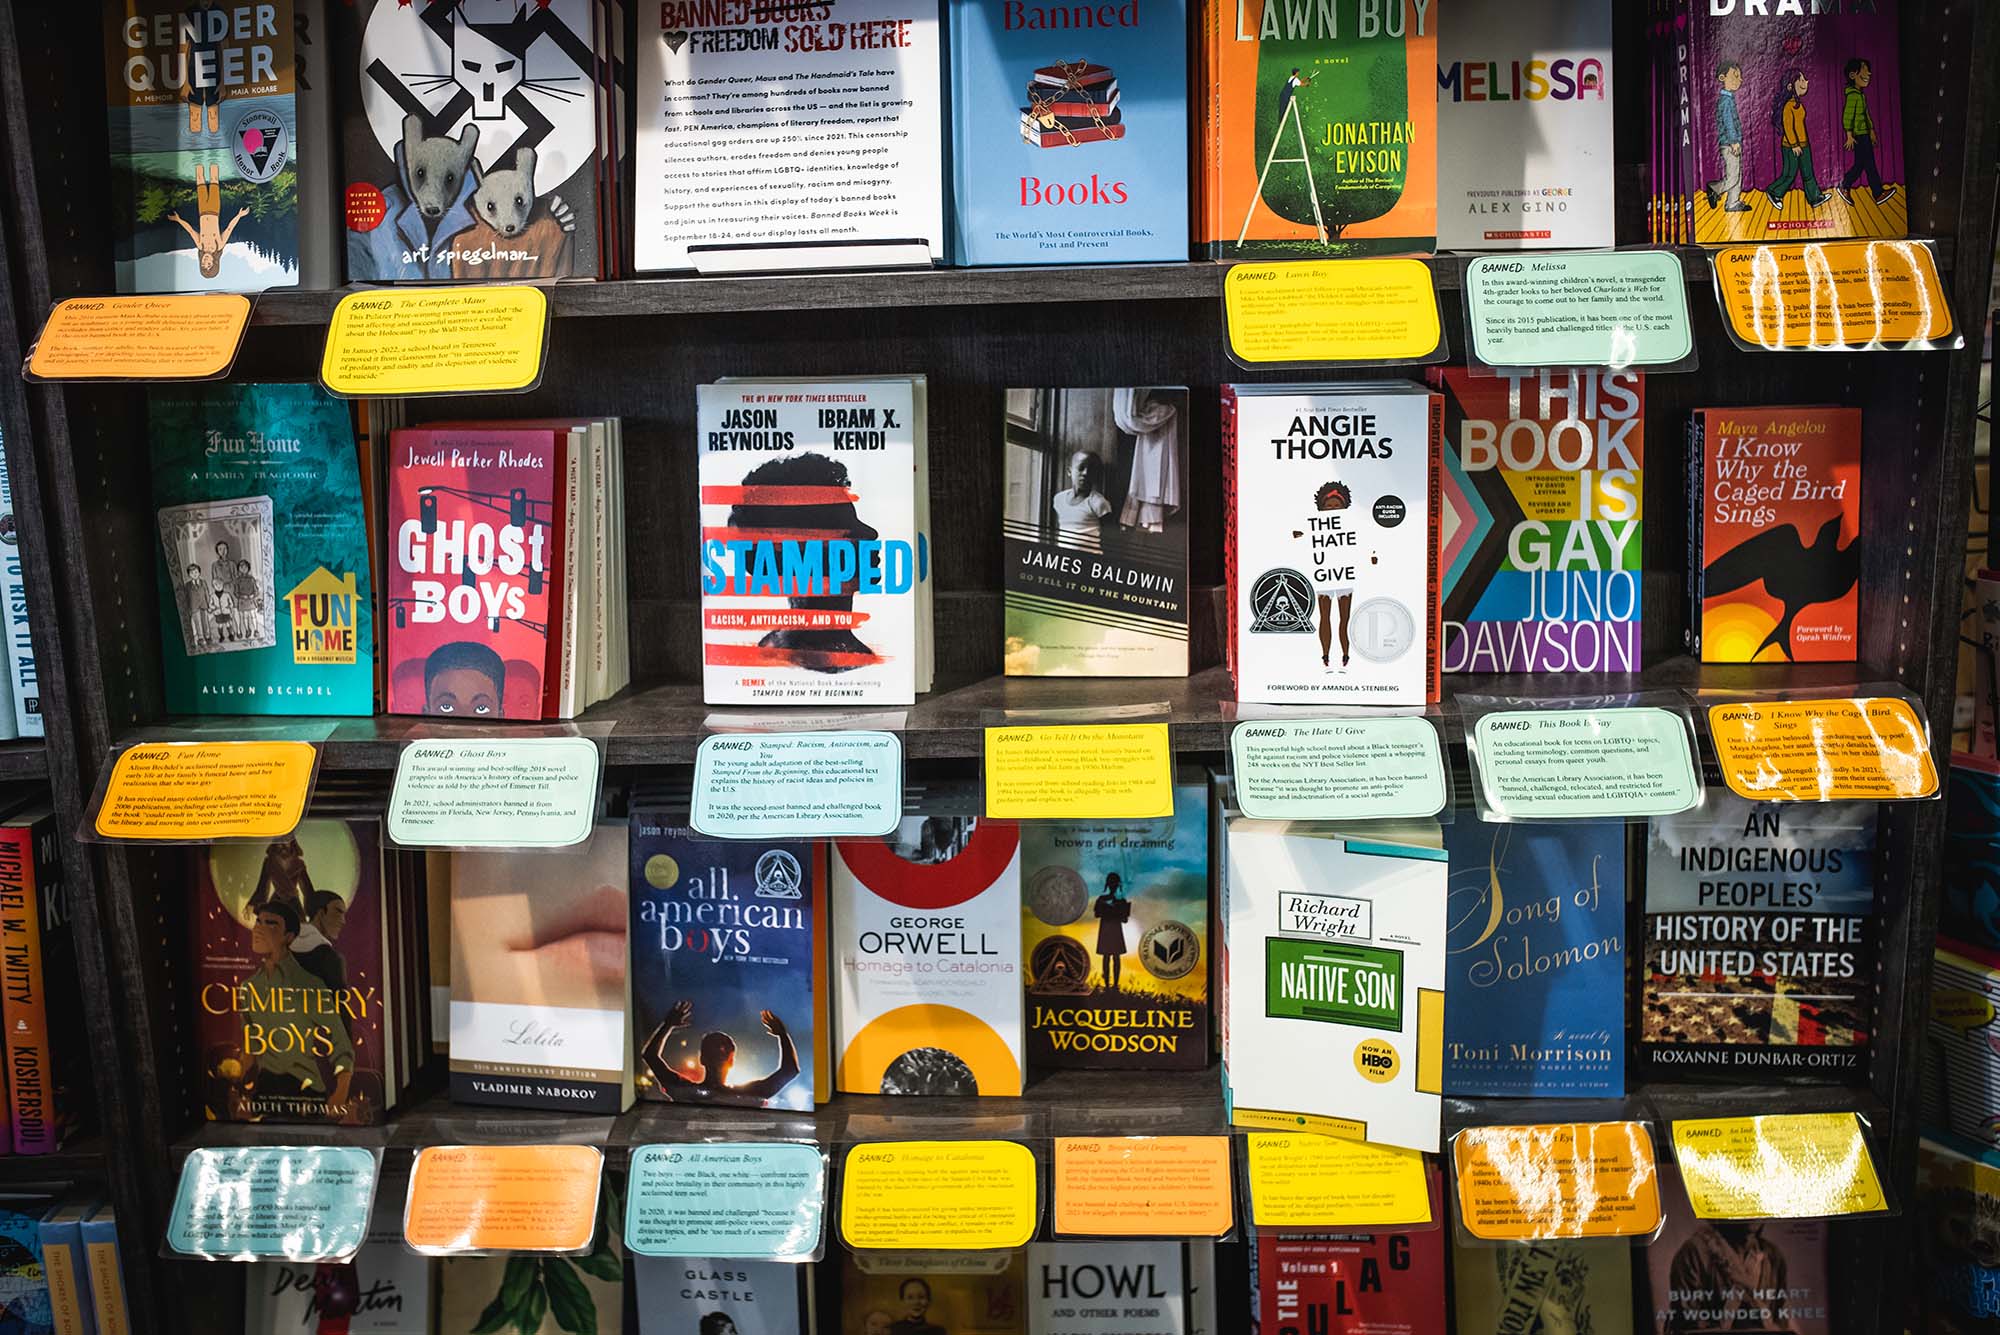 Want to Find a Banned Book? Brookline Booksmith Has Some on Display | BU  Today | Boston University